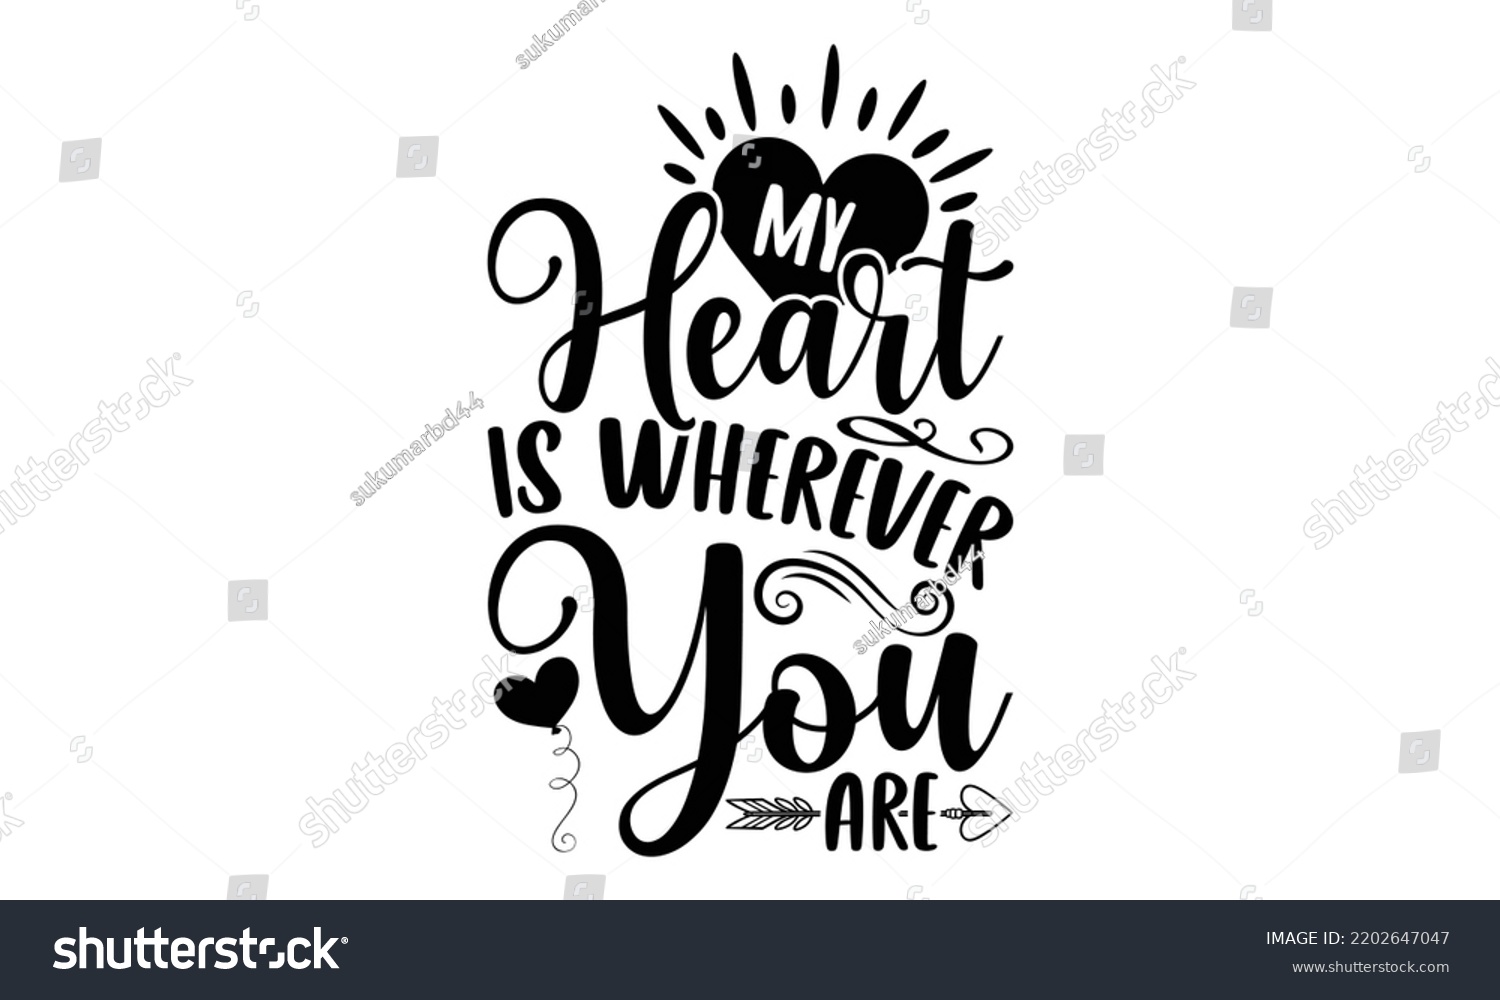 SVG of My Heart Is Wherever You Are - Valentine's Day 2023 quotes svg design, Hand drawn vintage hand lettering, This illustration can be used as a print on t-shirts and bags, stationary or as a poster. svg